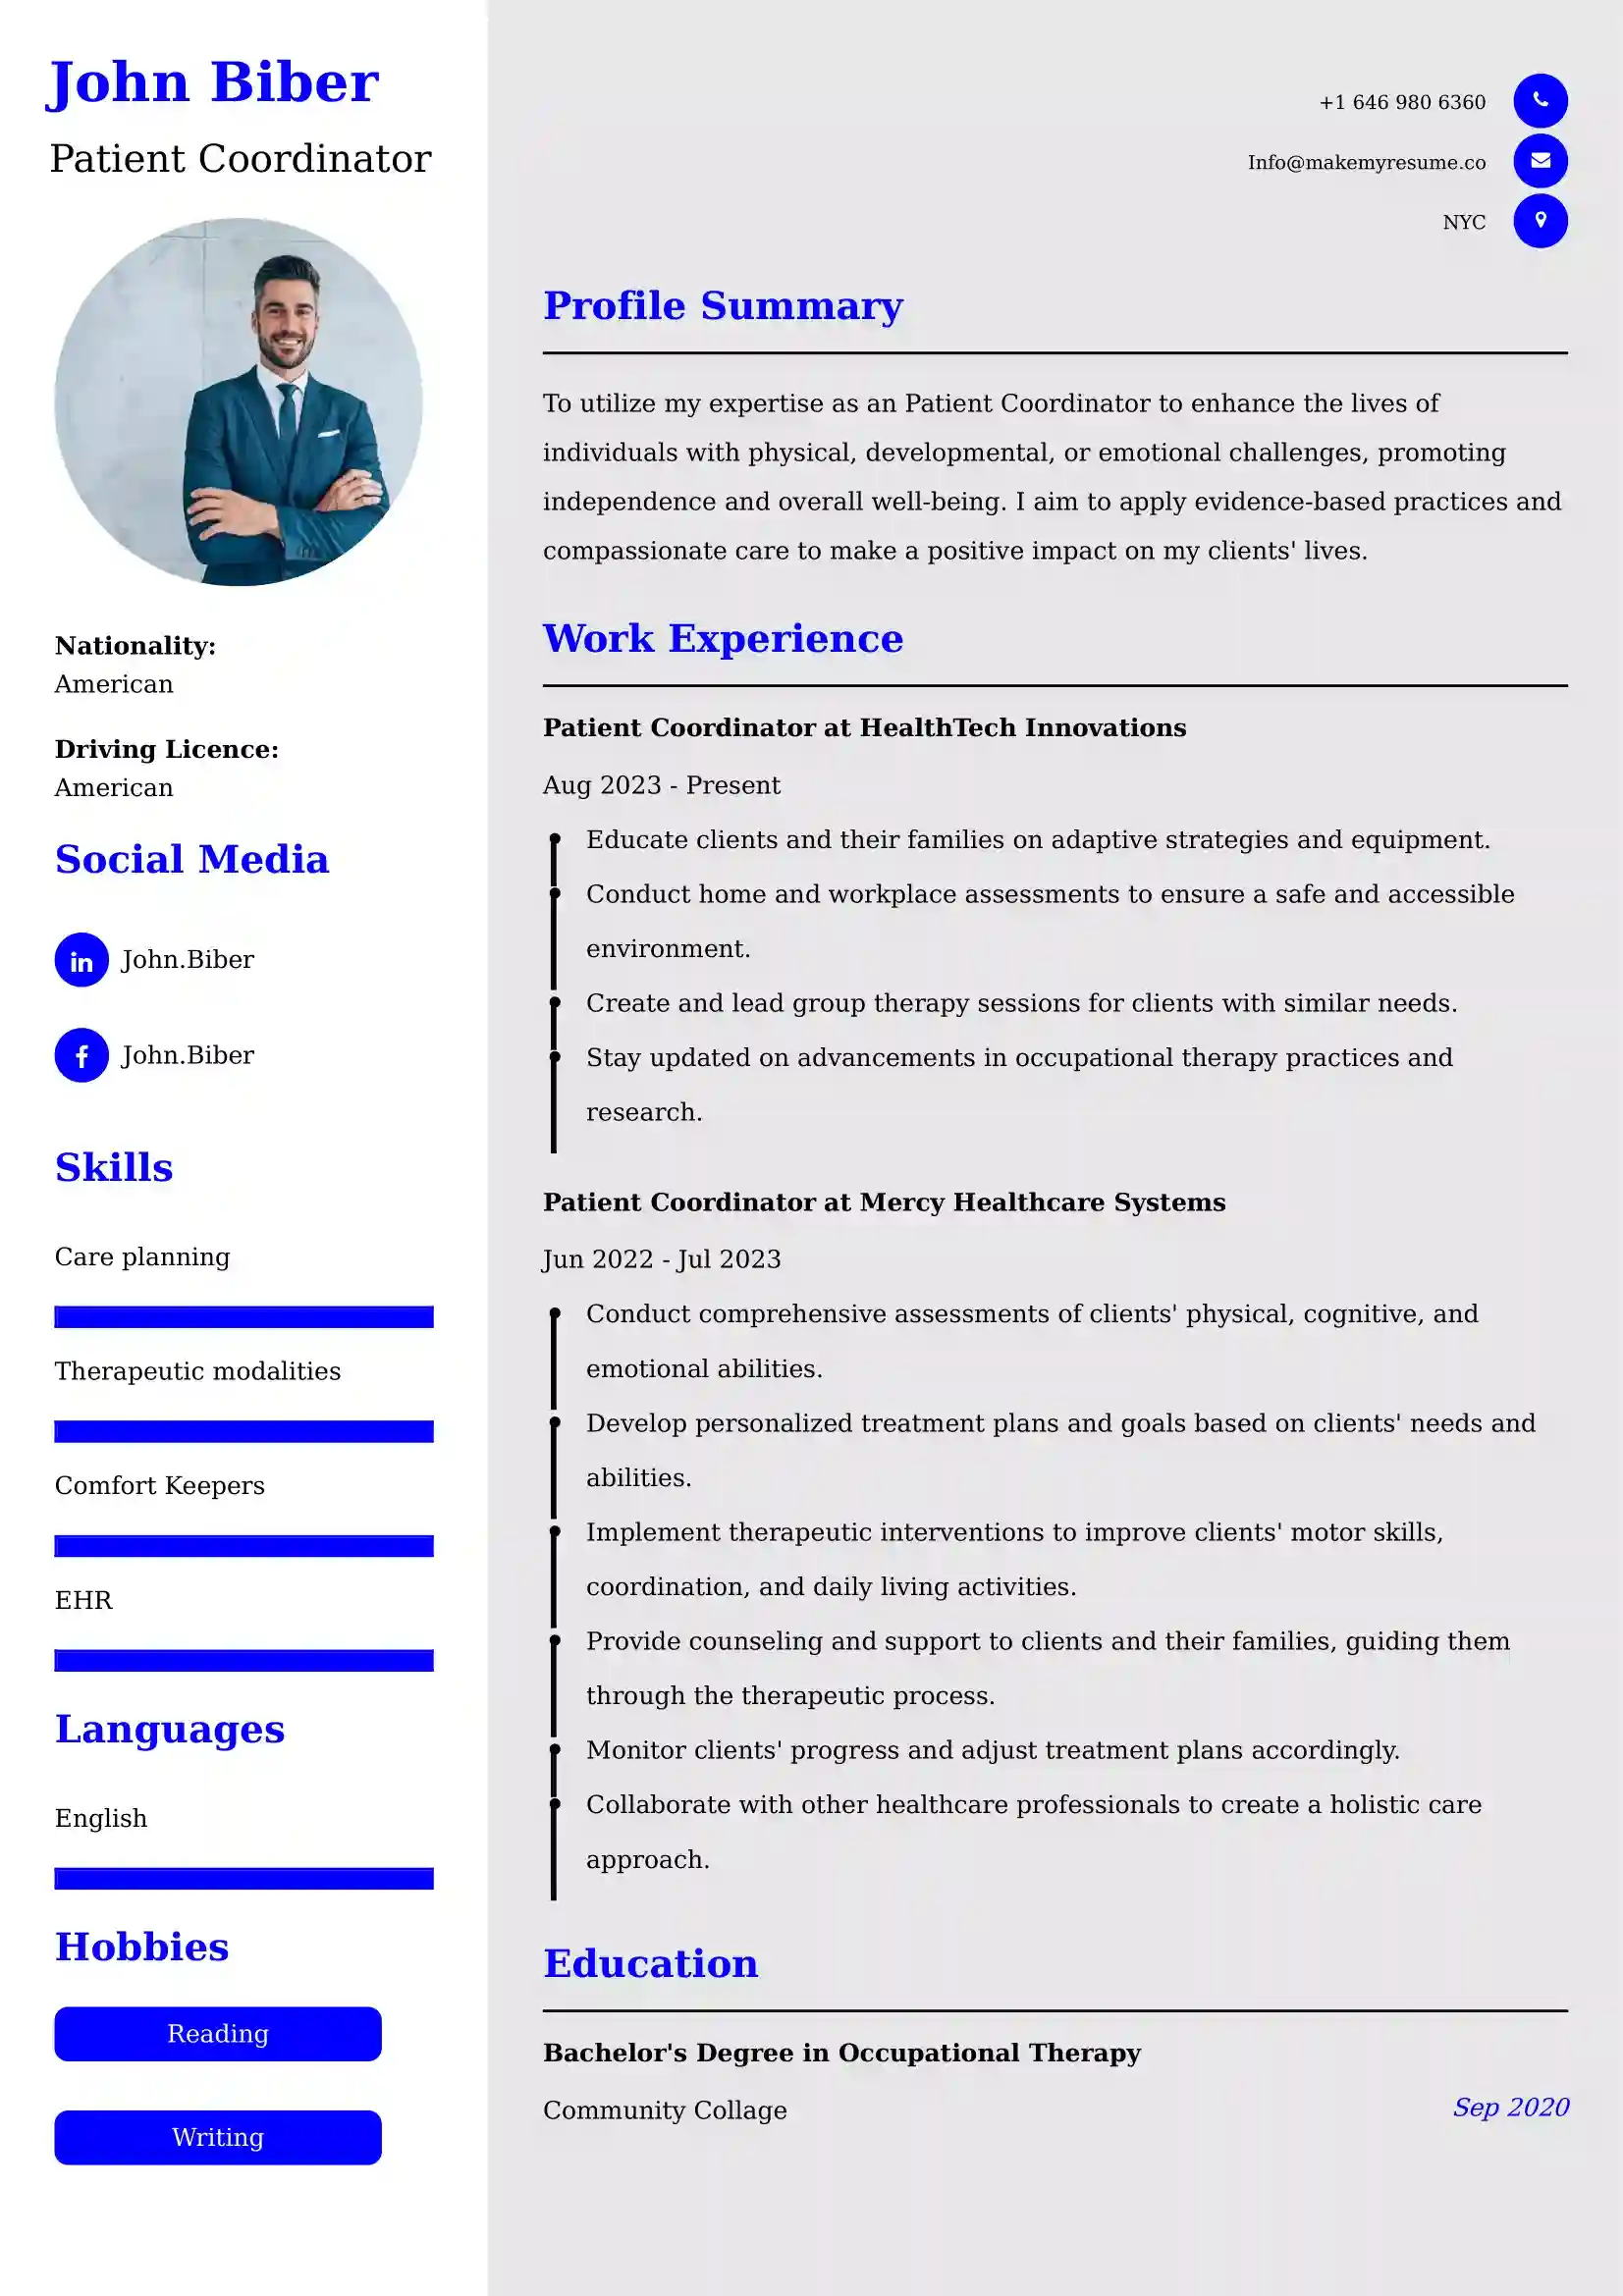 Patient Coordinator Resume Examples - UAE Format and Tips.